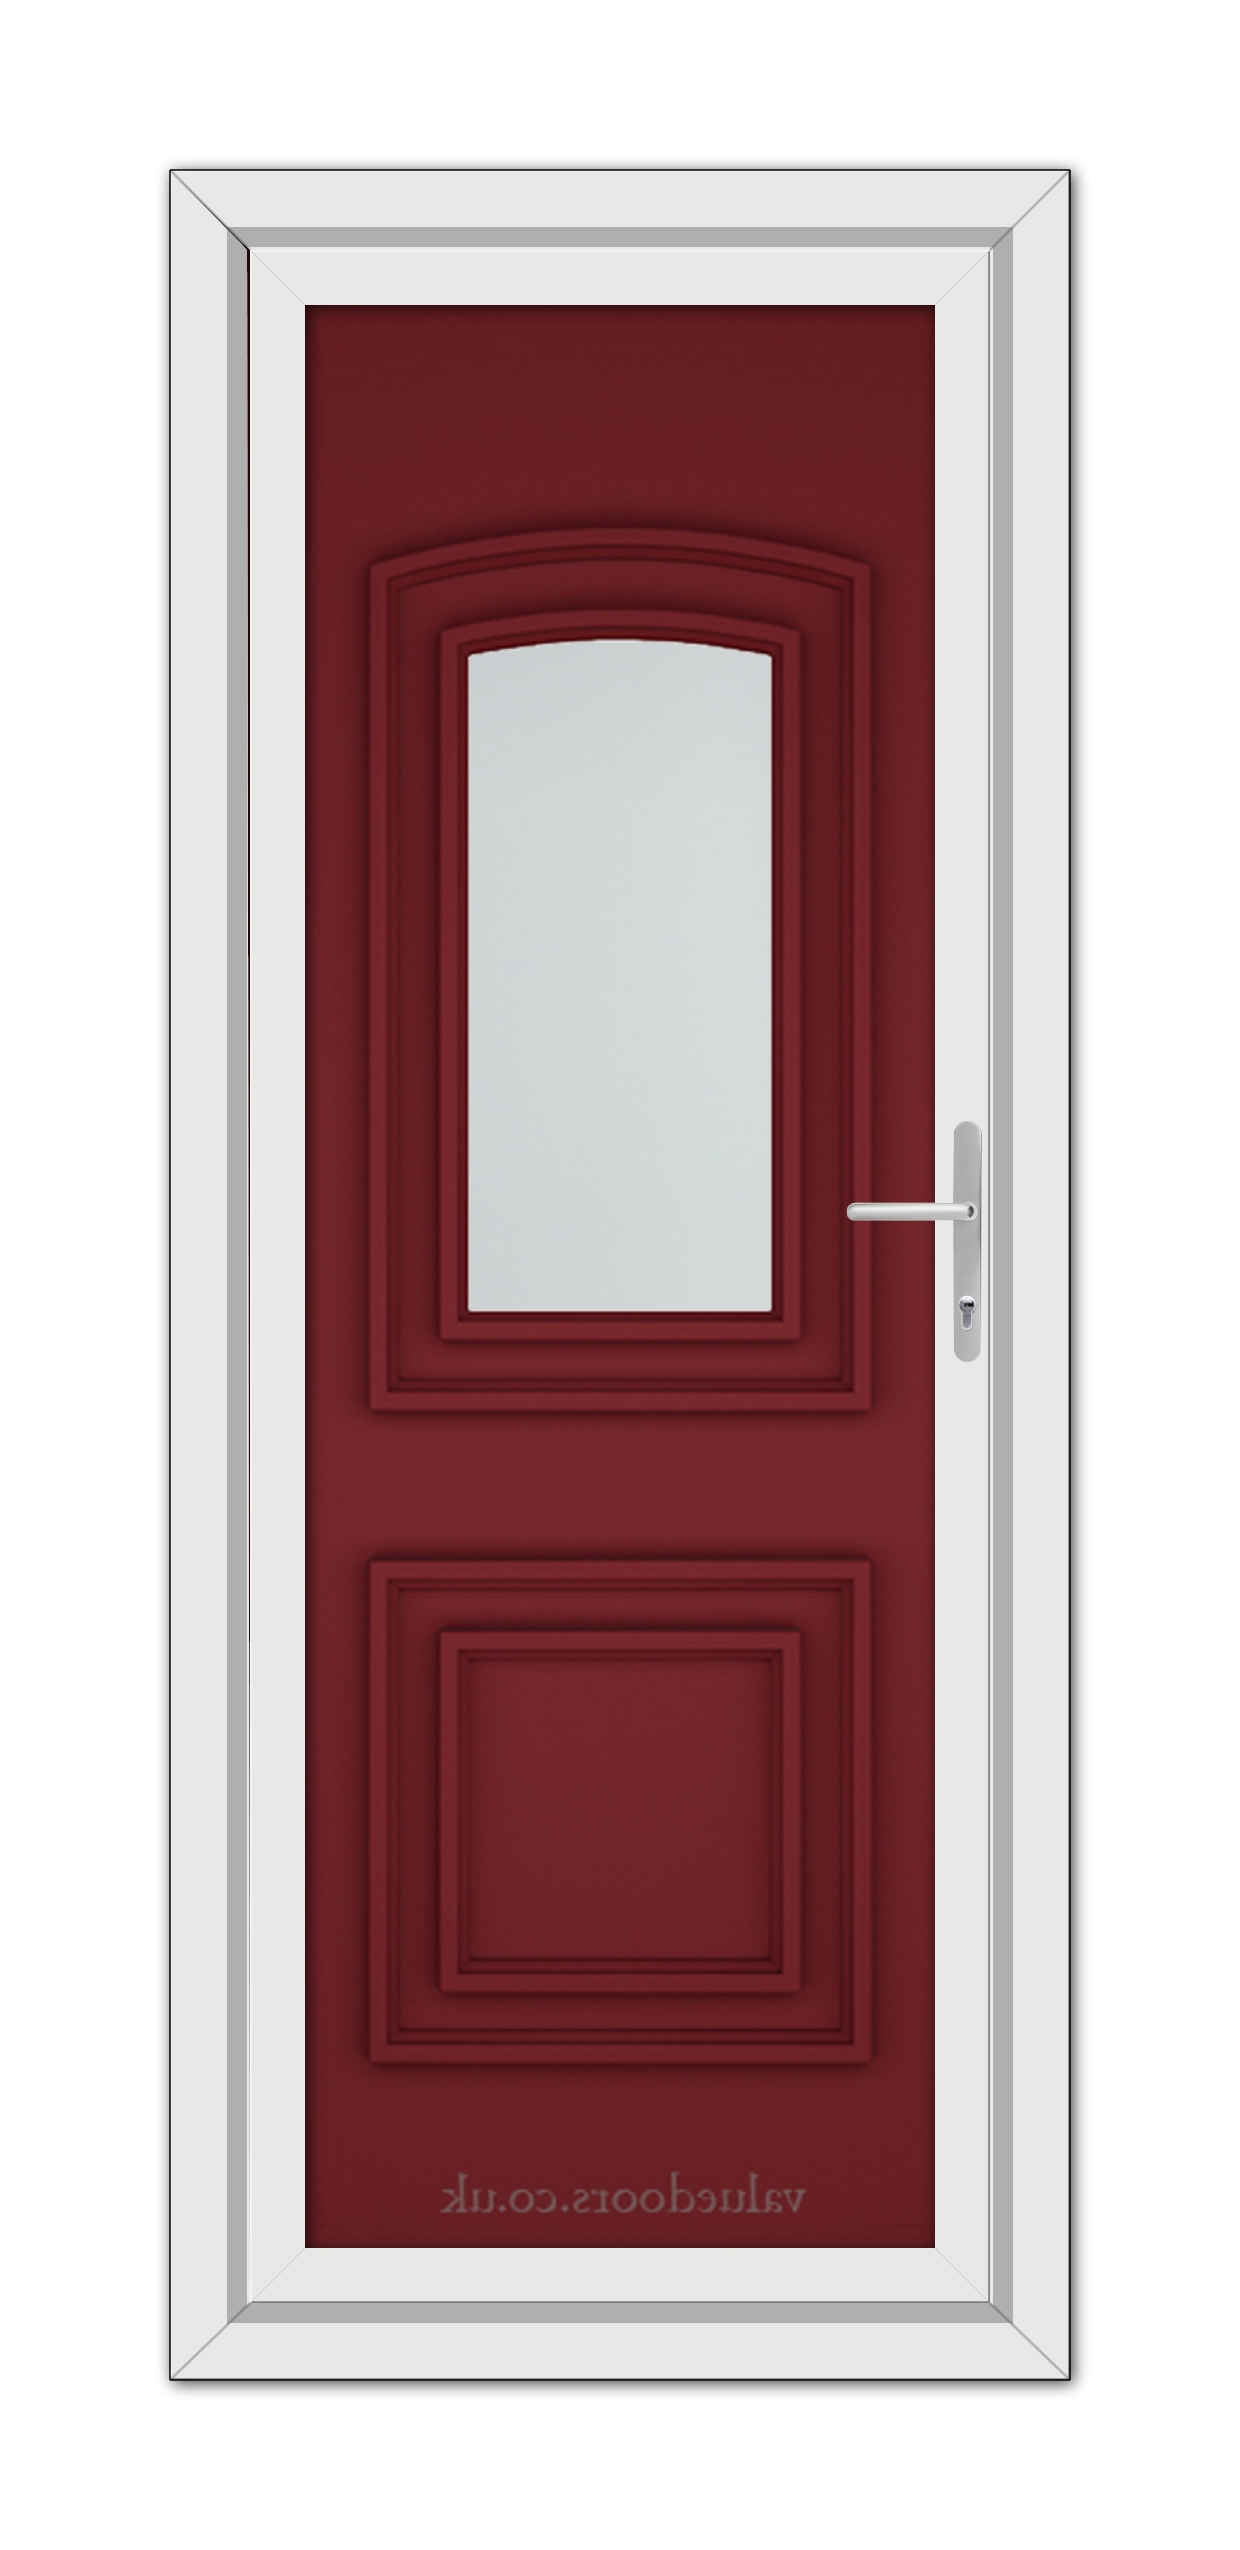 A vertical image of a closed modern Red Balmoral One uPVC door with a white frame, featuring a narrow vertical window and a metal handle.